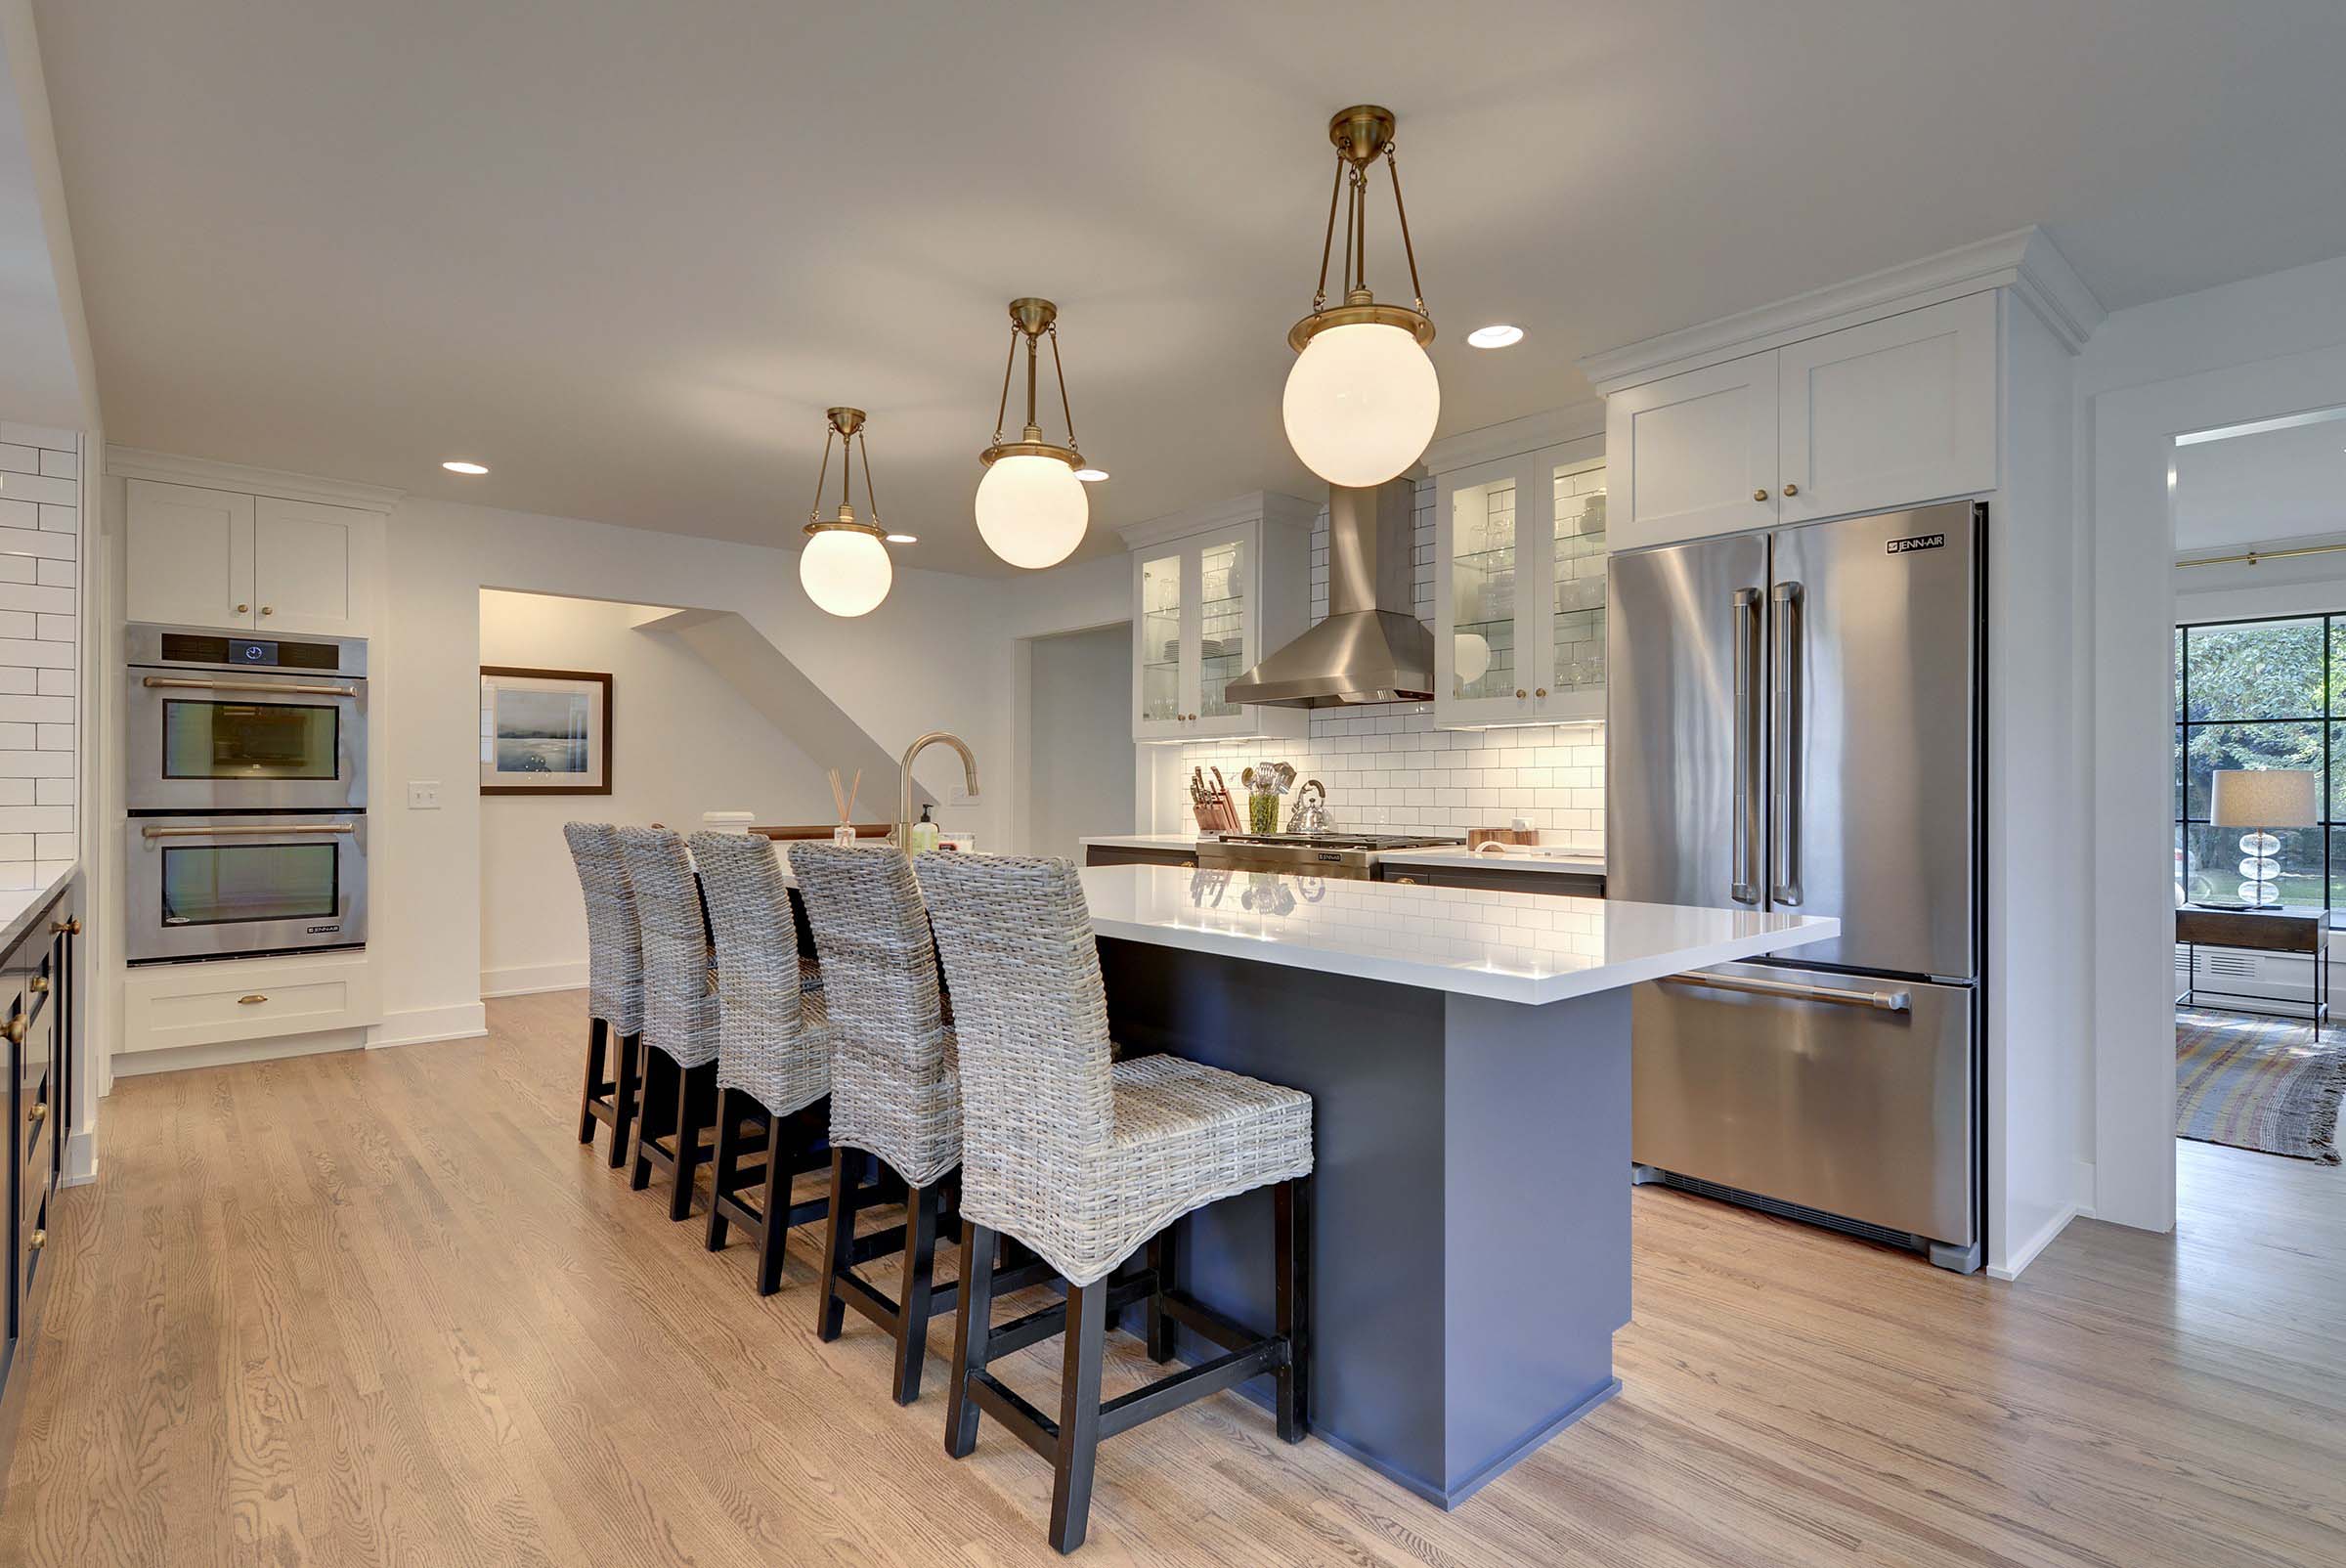 A kitchen with a center island and bar stools.